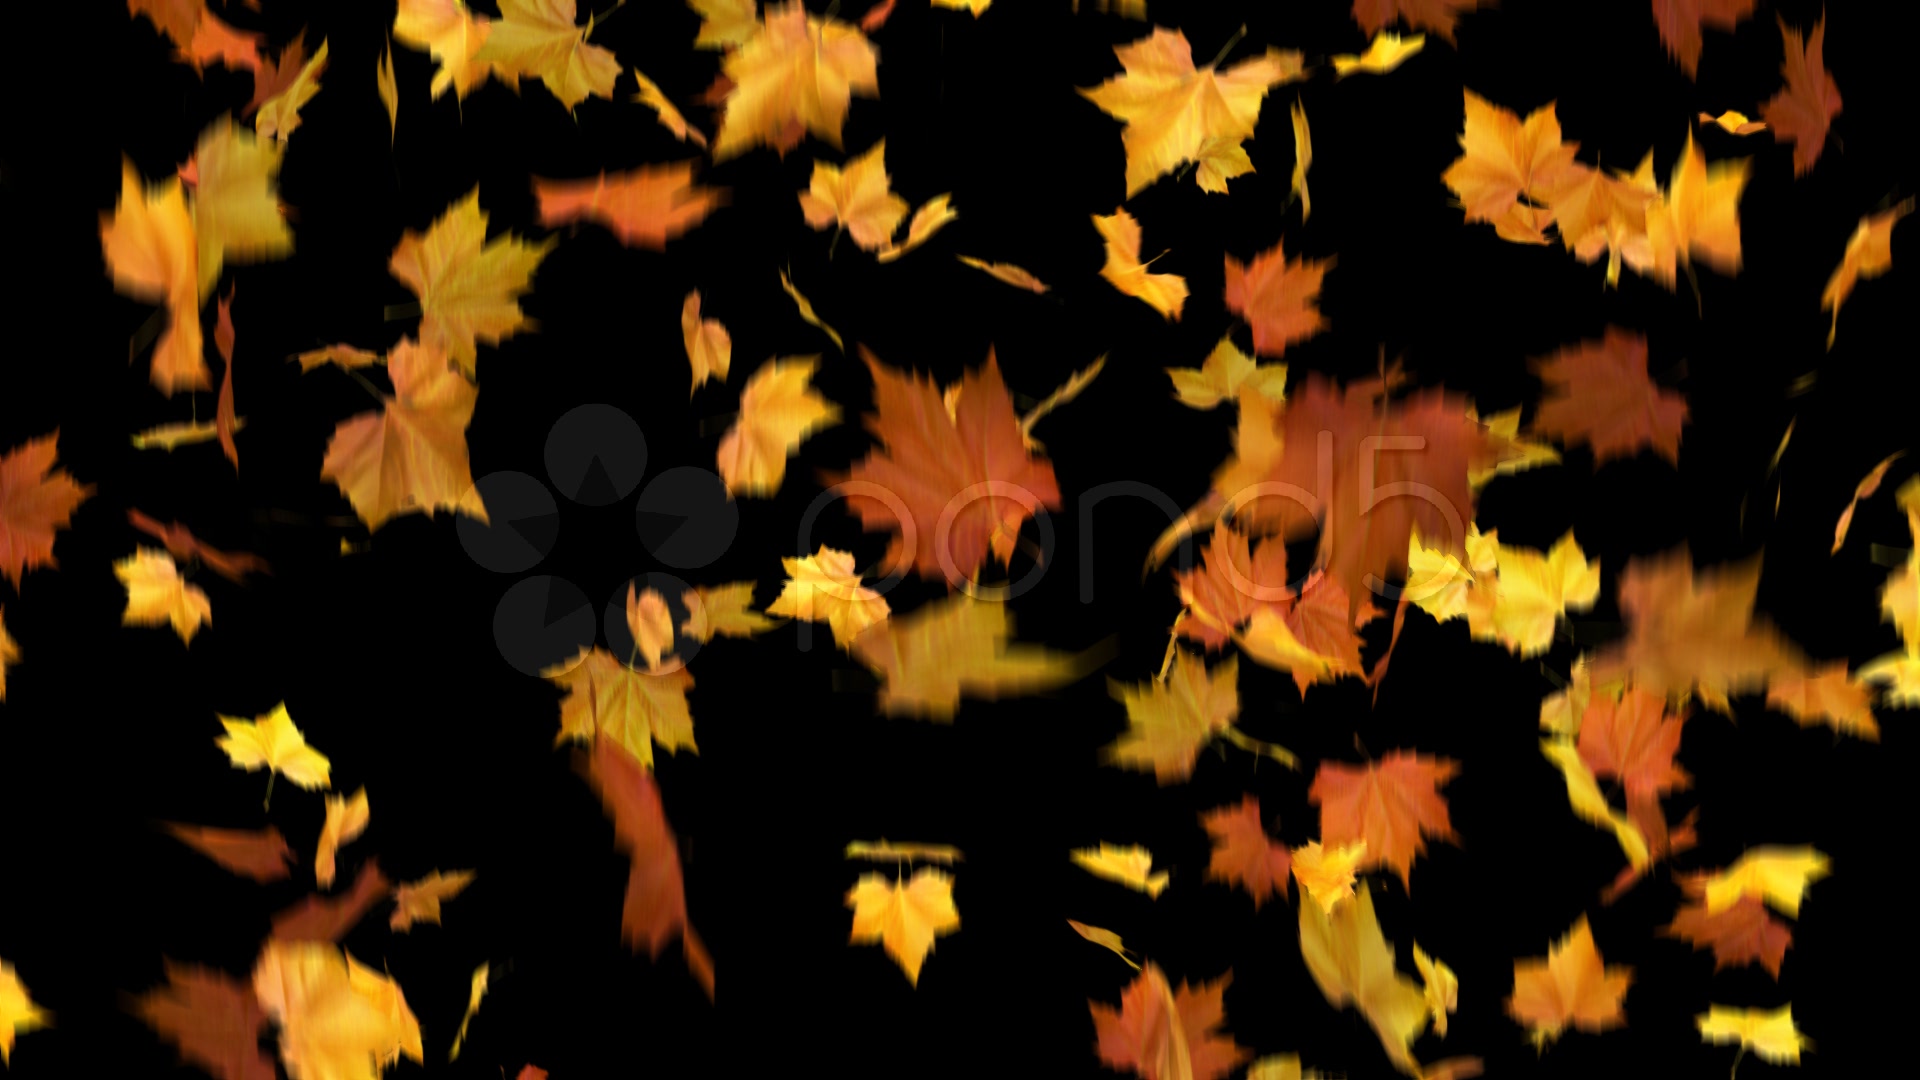 Falling Leaves Stock Footage ~ Royalty Free Stock Videos | Pond5